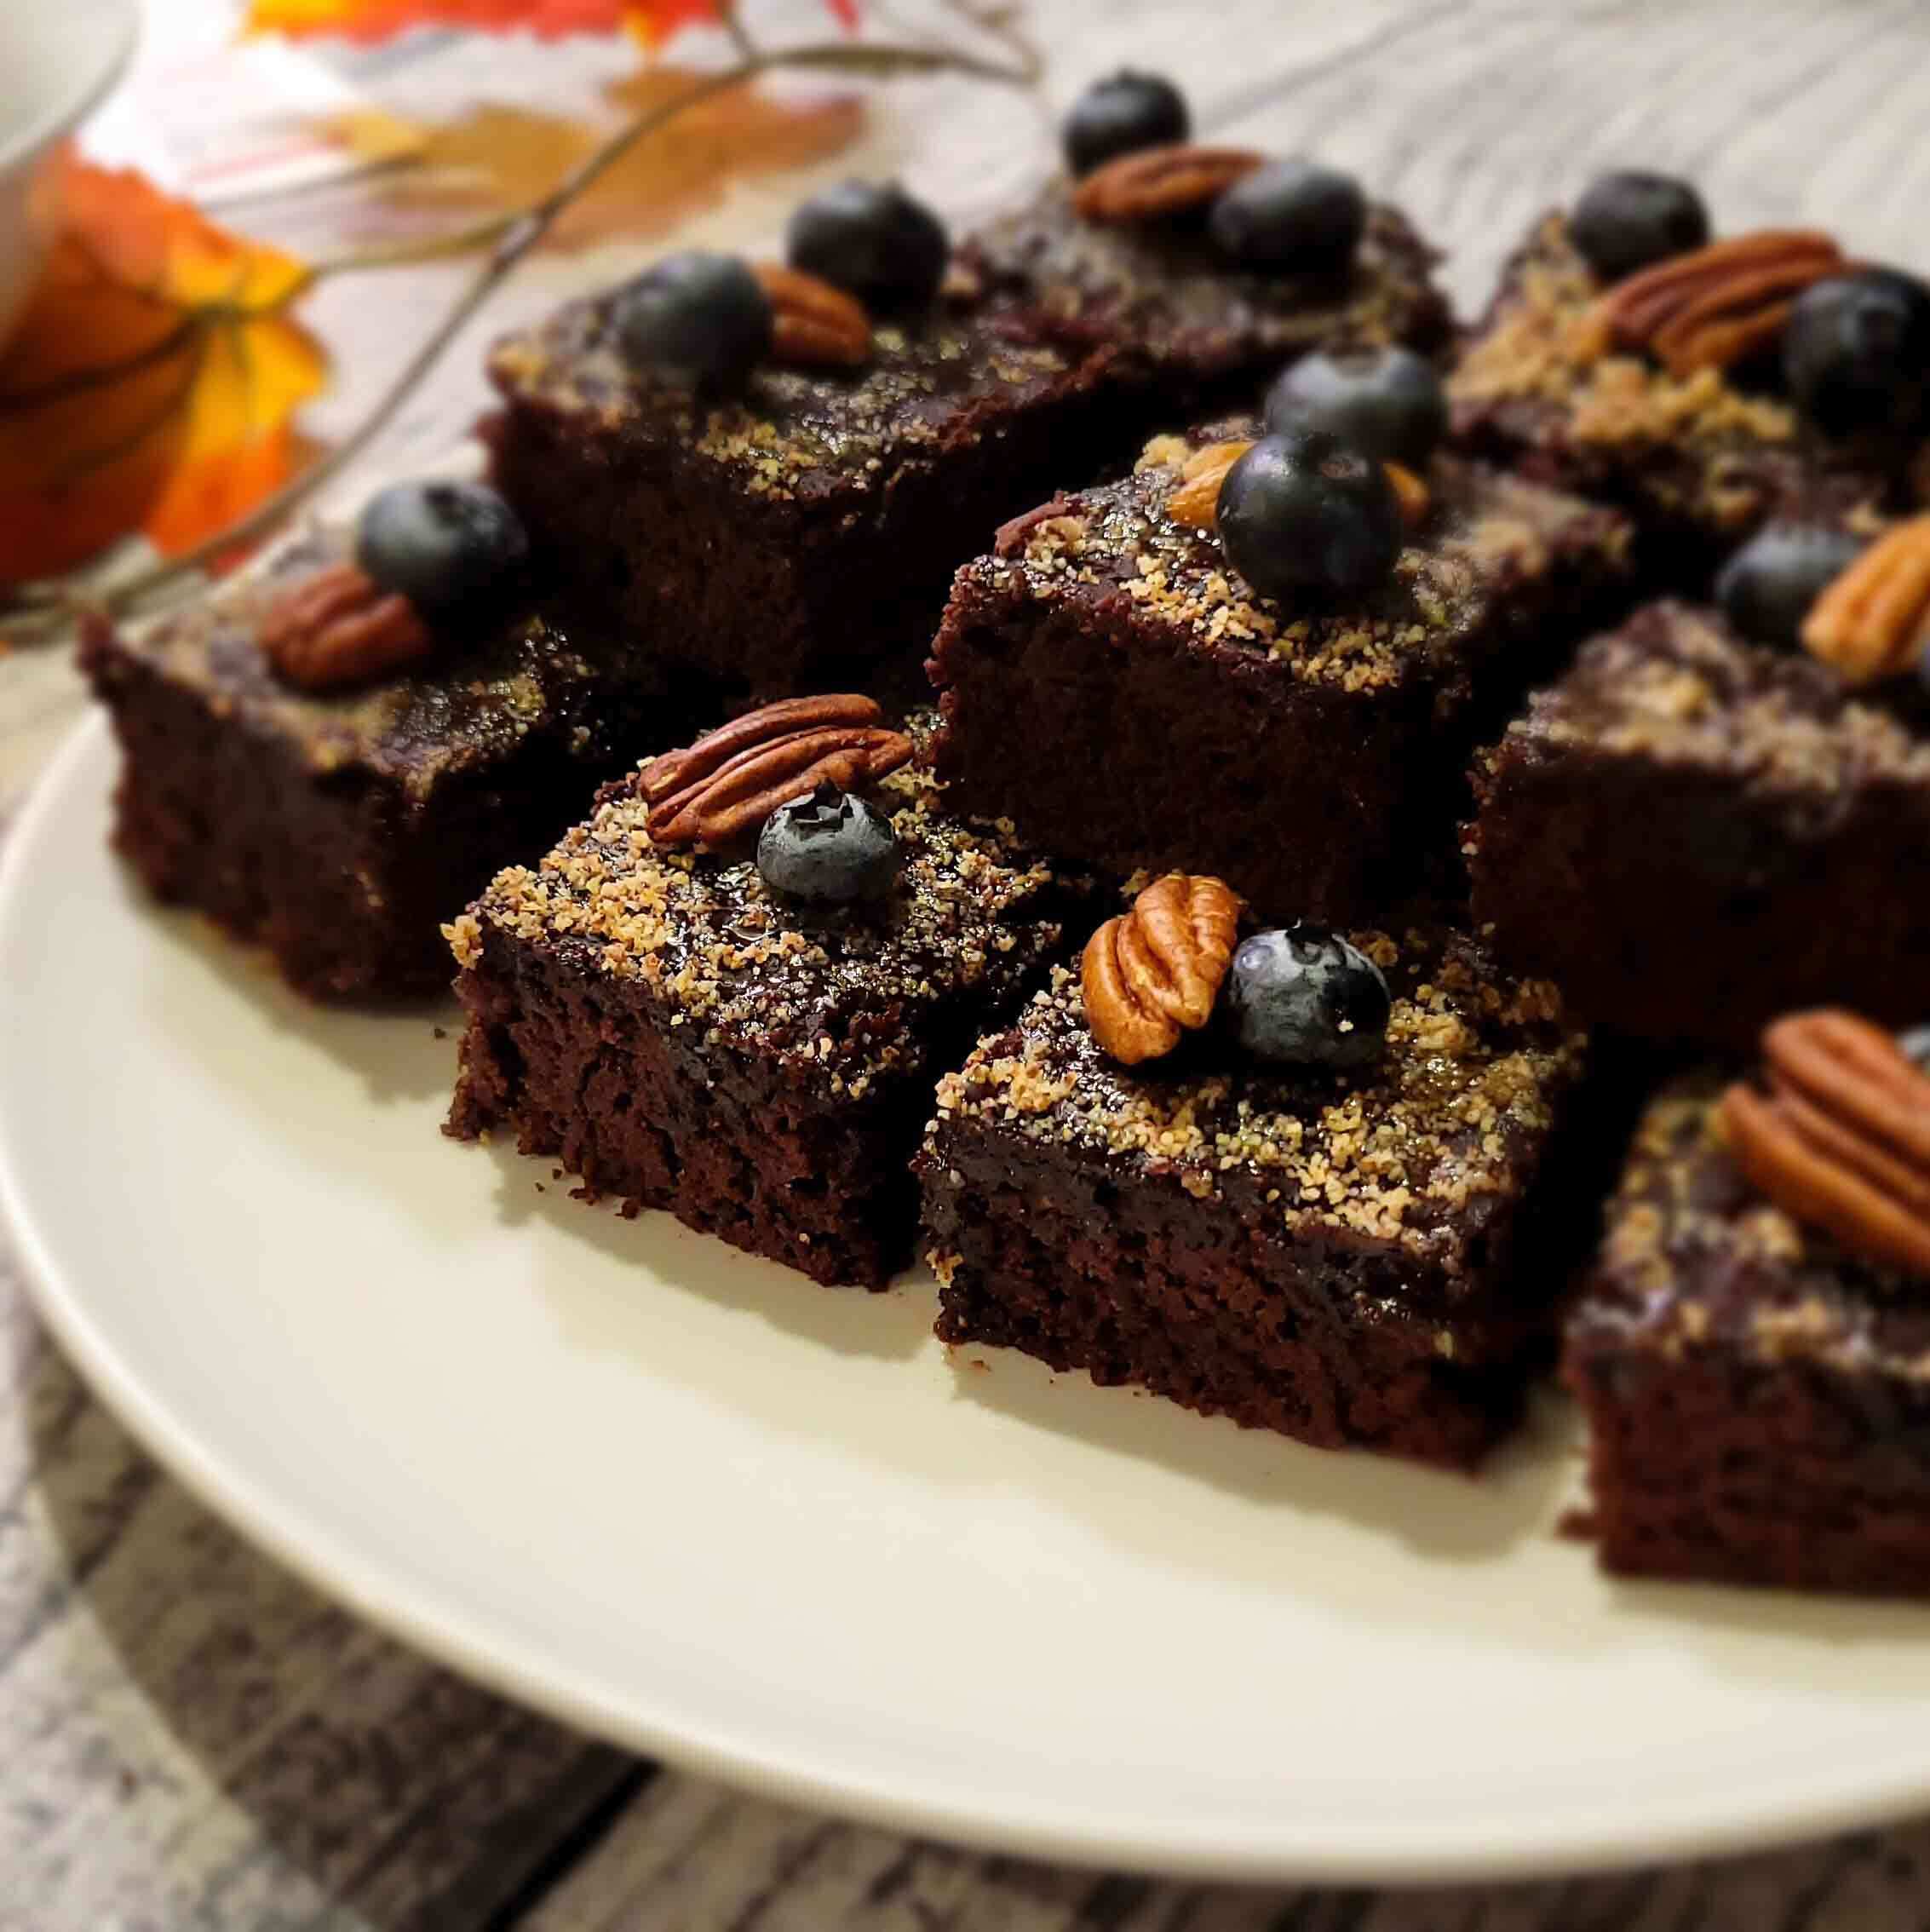 A cooking blog about Vegan, Honey-Roasted Pecan Brownies, made by roasting pecans with honey and cinnamon.